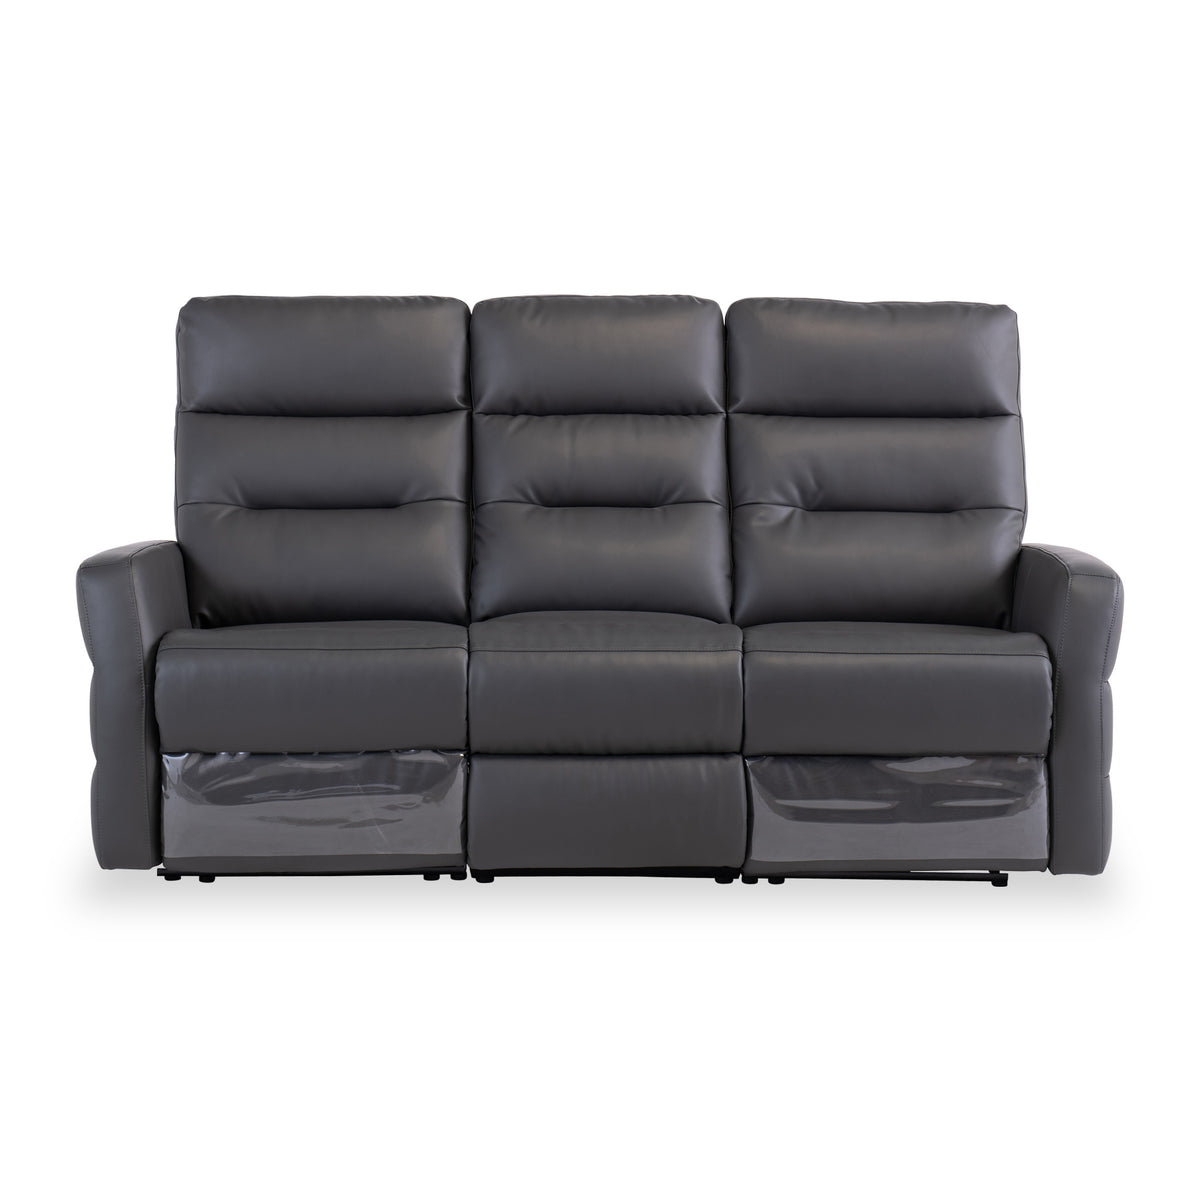 Harlem Charcoal Leather Electric Reclining 3 Seater Sofa from Roseland Furniture